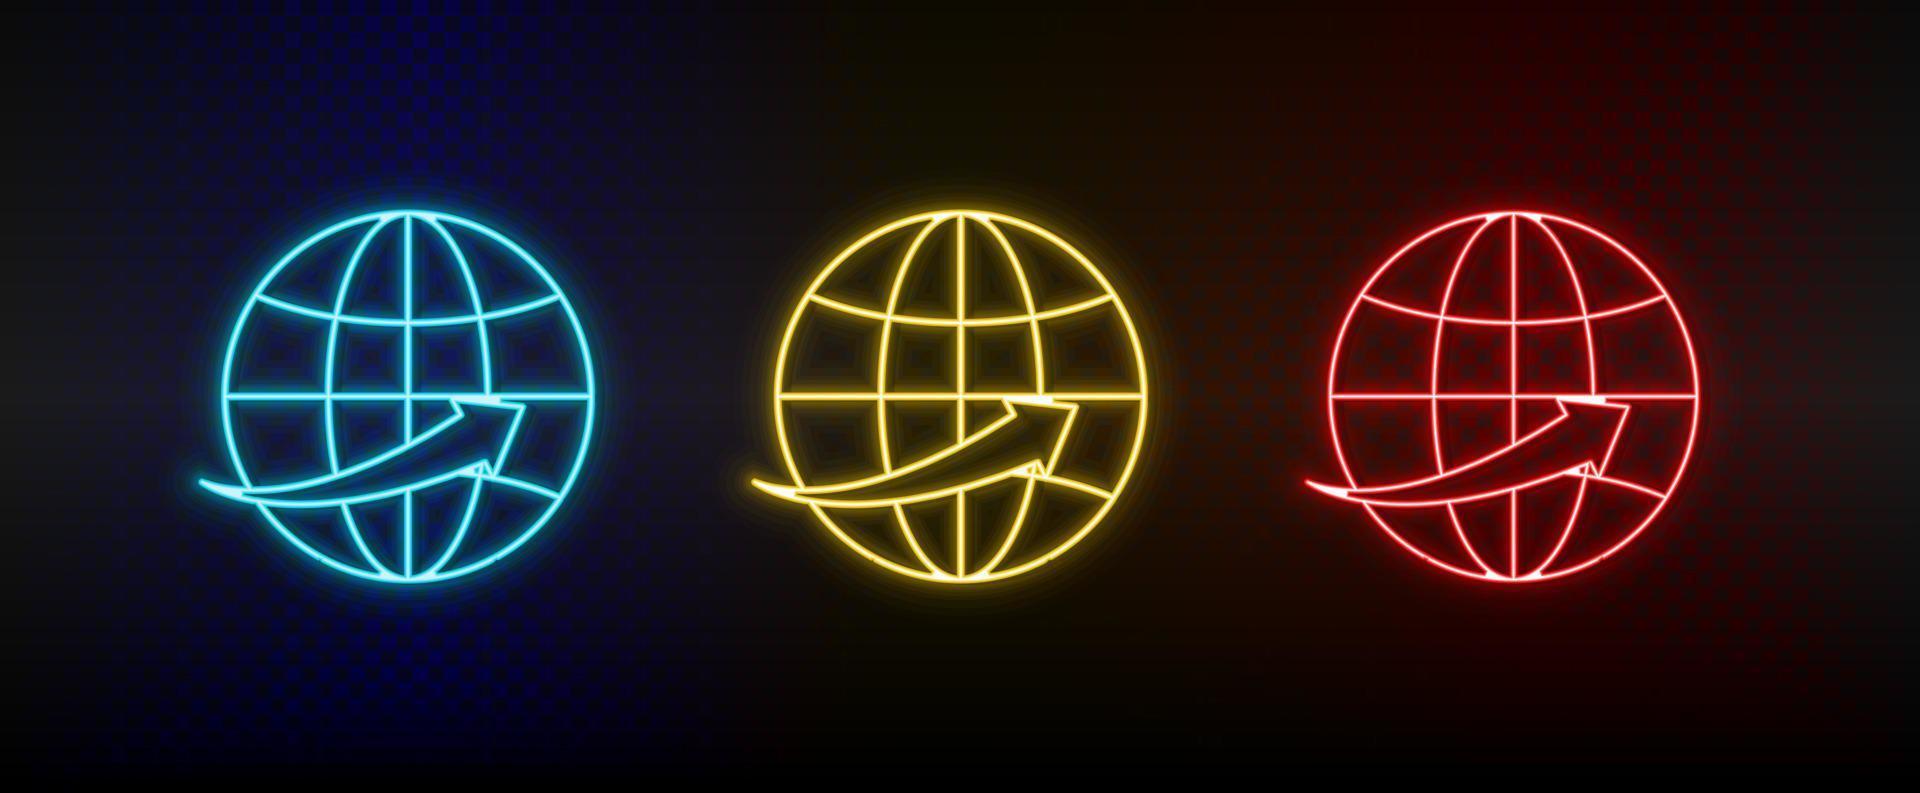 Neon icon set global business, communication. Set of red, blue, yellow neon vector icon on transparency dark background